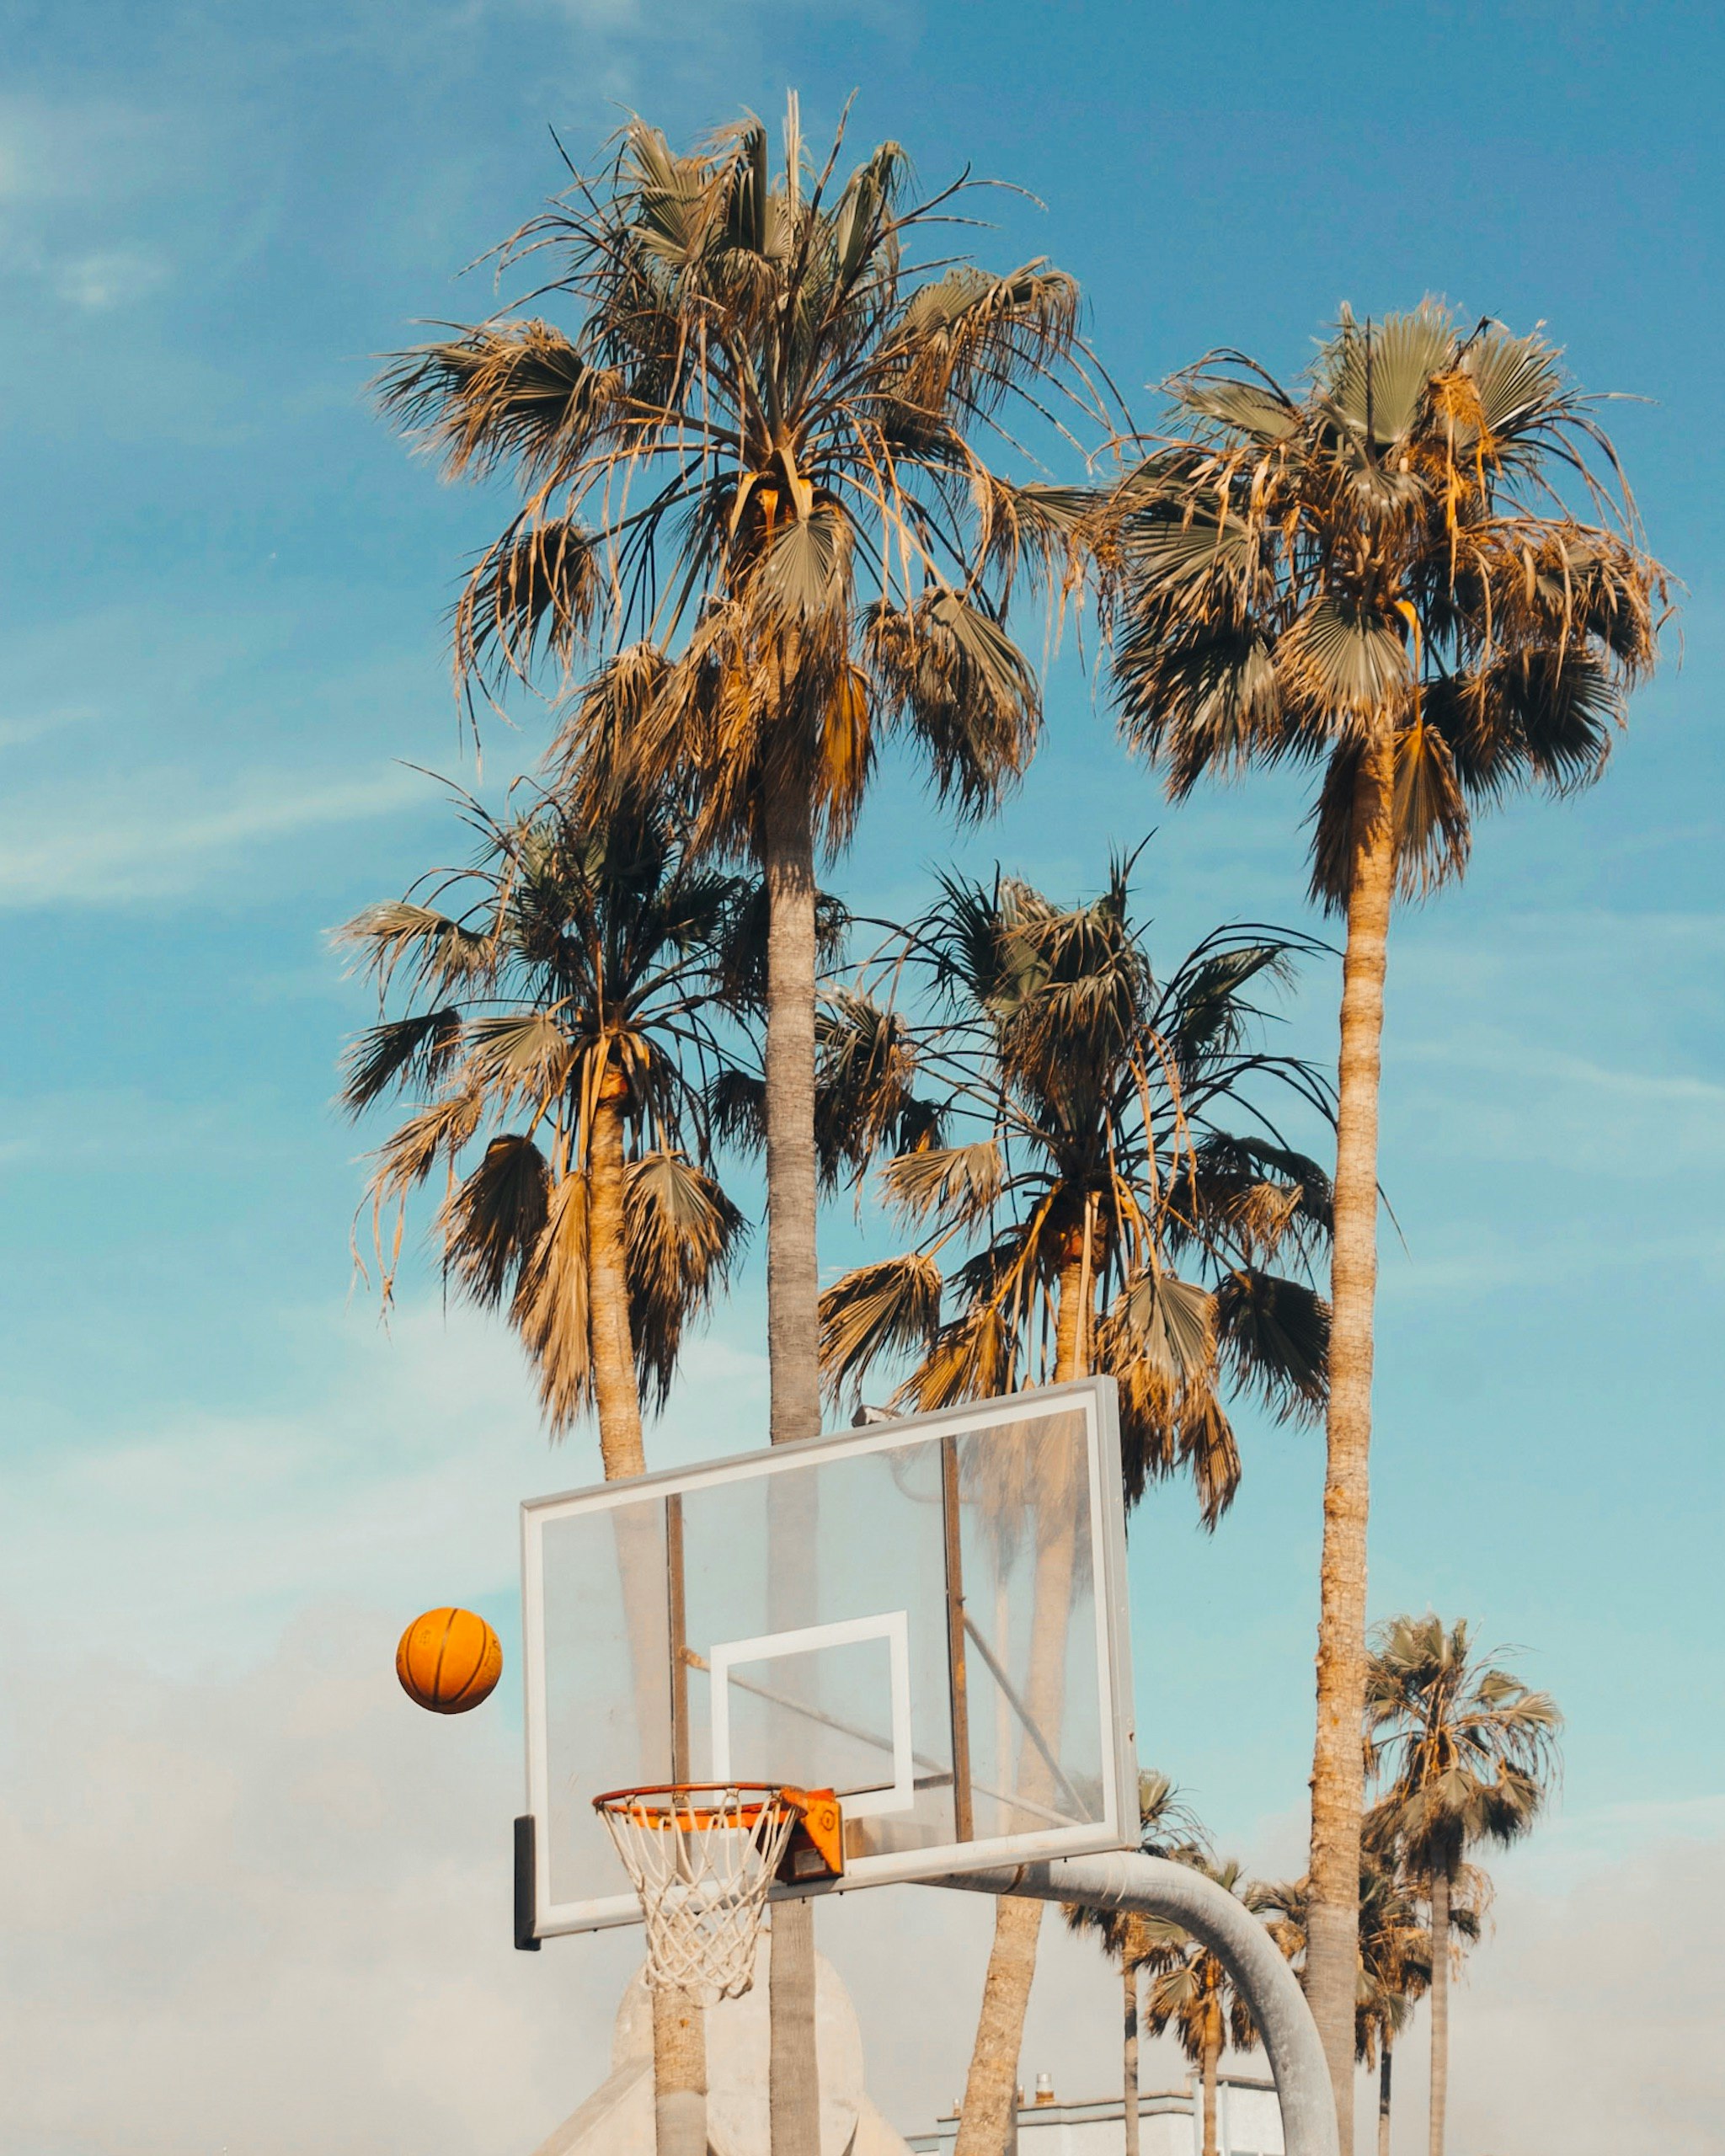 white and gray basketball system beside coconut trees